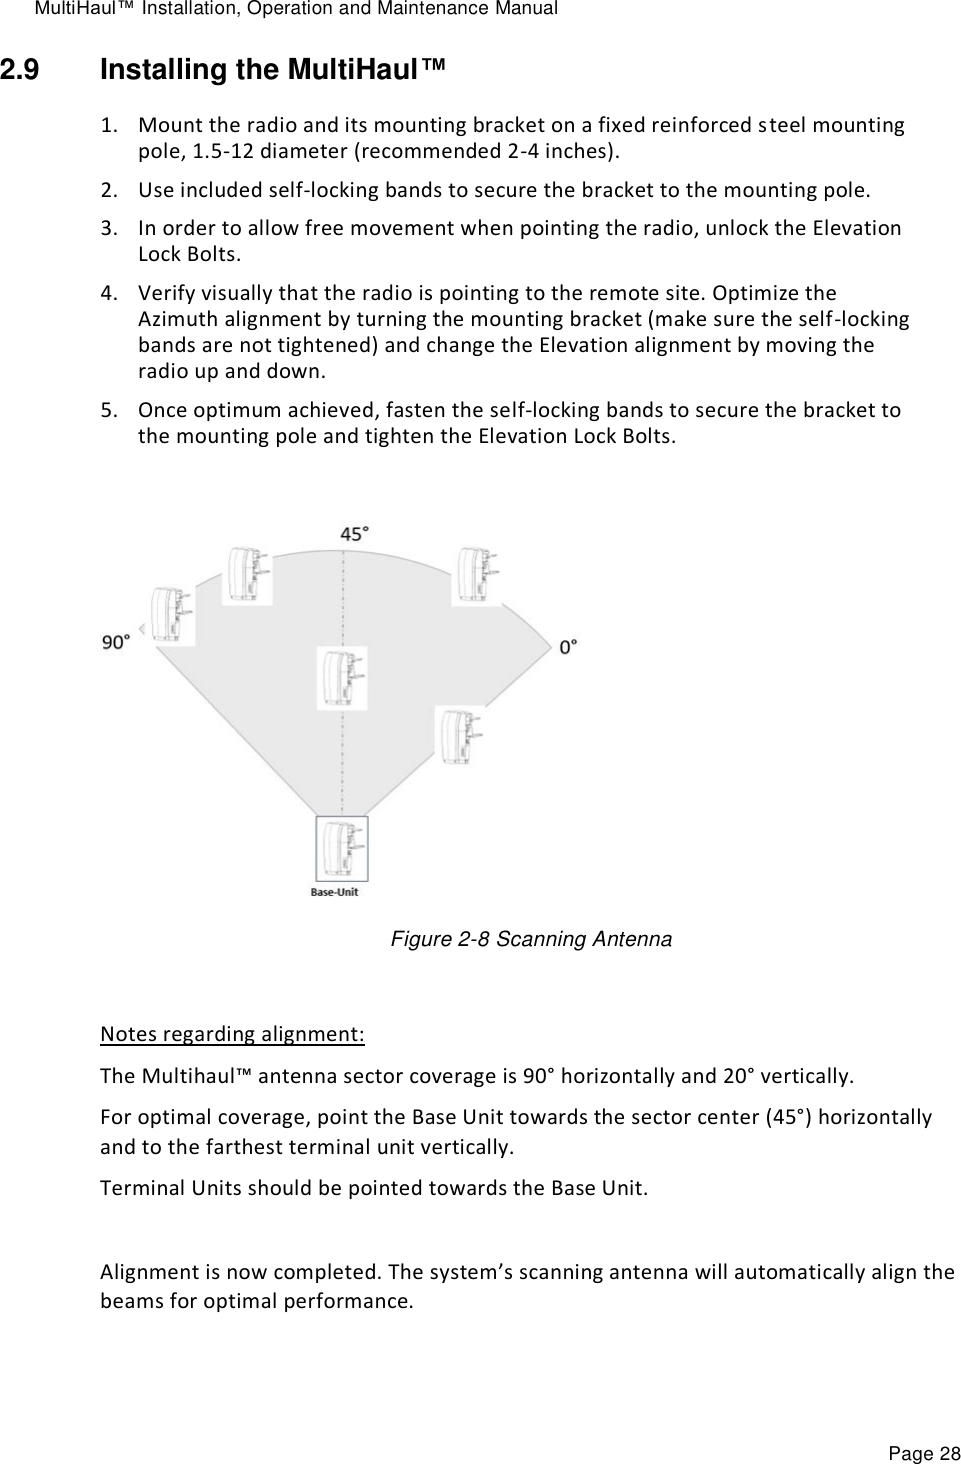 MultiHaul™ Installation, Operation and Maintenance Manual Page 28 2.9  Installing the MultiHaul™ 1. Mount the radio and its mounting bracket on a fixed reinforced steel mounting pole, 1.5-12 diameter (recommended 2-4 inches). 2. Use included self-locking bands to secure the bracket to the mounting pole. 3. In order to allow free movement when pointing the radio, unlock the Elevation Lock Bolts. 4. Verify visually that the radio is pointing to the remote site. Optimize the Azimuth alignment by turning the mounting bracket (make sure the self-locking bands are not tightened) and change the Elevation alignment by moving the radio up and down.  5. Once optimum achieved, fasten the self-locking bands to secure the bracket to the mounting pole and tighten the Elevation Lock Bolts.             Figure 2-8 Scanning Antenna  Notes regarding alignment: The Multihaul™ antenna sector coverage is 90° horizontally and 20° vertically. For optimal coverage, point the Base Unit towards the sector center (45°) horizontally and to the farthest terminal unit vertically.  Terminal Units should be pointed towards the Base Unit.  Alignment is now completed. The system’s scanning antenna will automatically align the beams for optimal performance.   